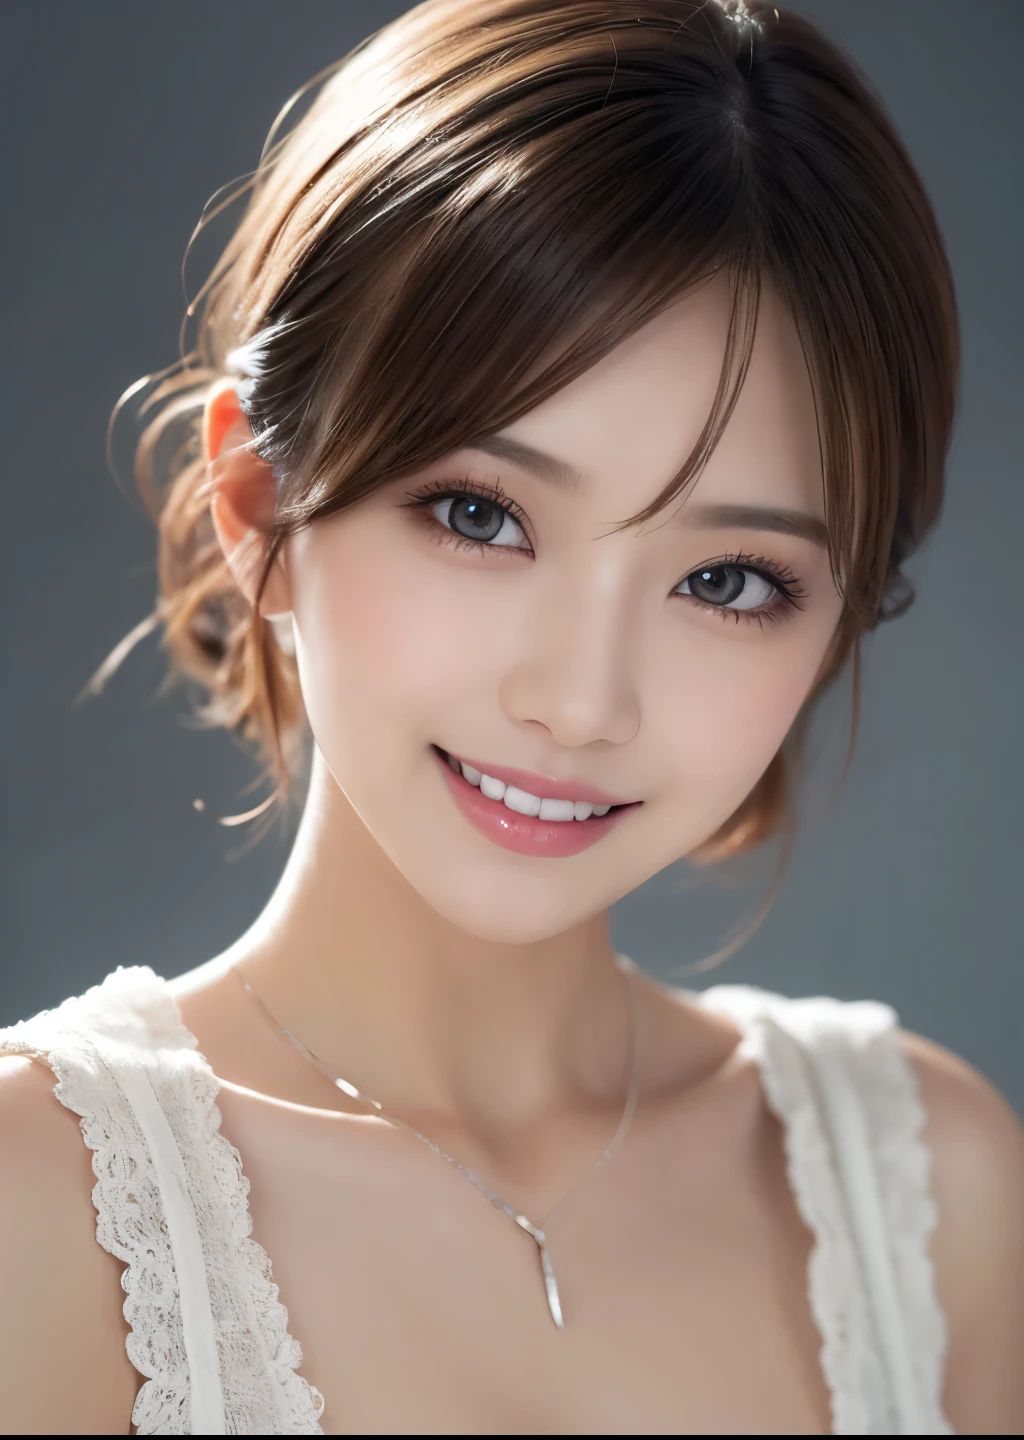 One Girl, makeup:1.3、Eyeshadow 1.3、(Wear trendy fashion:1.2), (RAW Photos, highest quality), (Realistic, Realistic:1.4), Tabletop, Very delicate and beautiful, Very detailed, 2k wallpaper, wonderful, In detail, Very detailed CG Unity 8k wallpaper, Very detailedな, High resolution, Soft Light, Beautiful detailed girl, Looking into the camera、Very detailedな目と顔, Beautiful and detailed nose, Beautiful details, short hair, small, Milky white sheer dress、White Background、The background is gray、Cinema Lighting, Perfect Anatomy, Slender body, smile, 